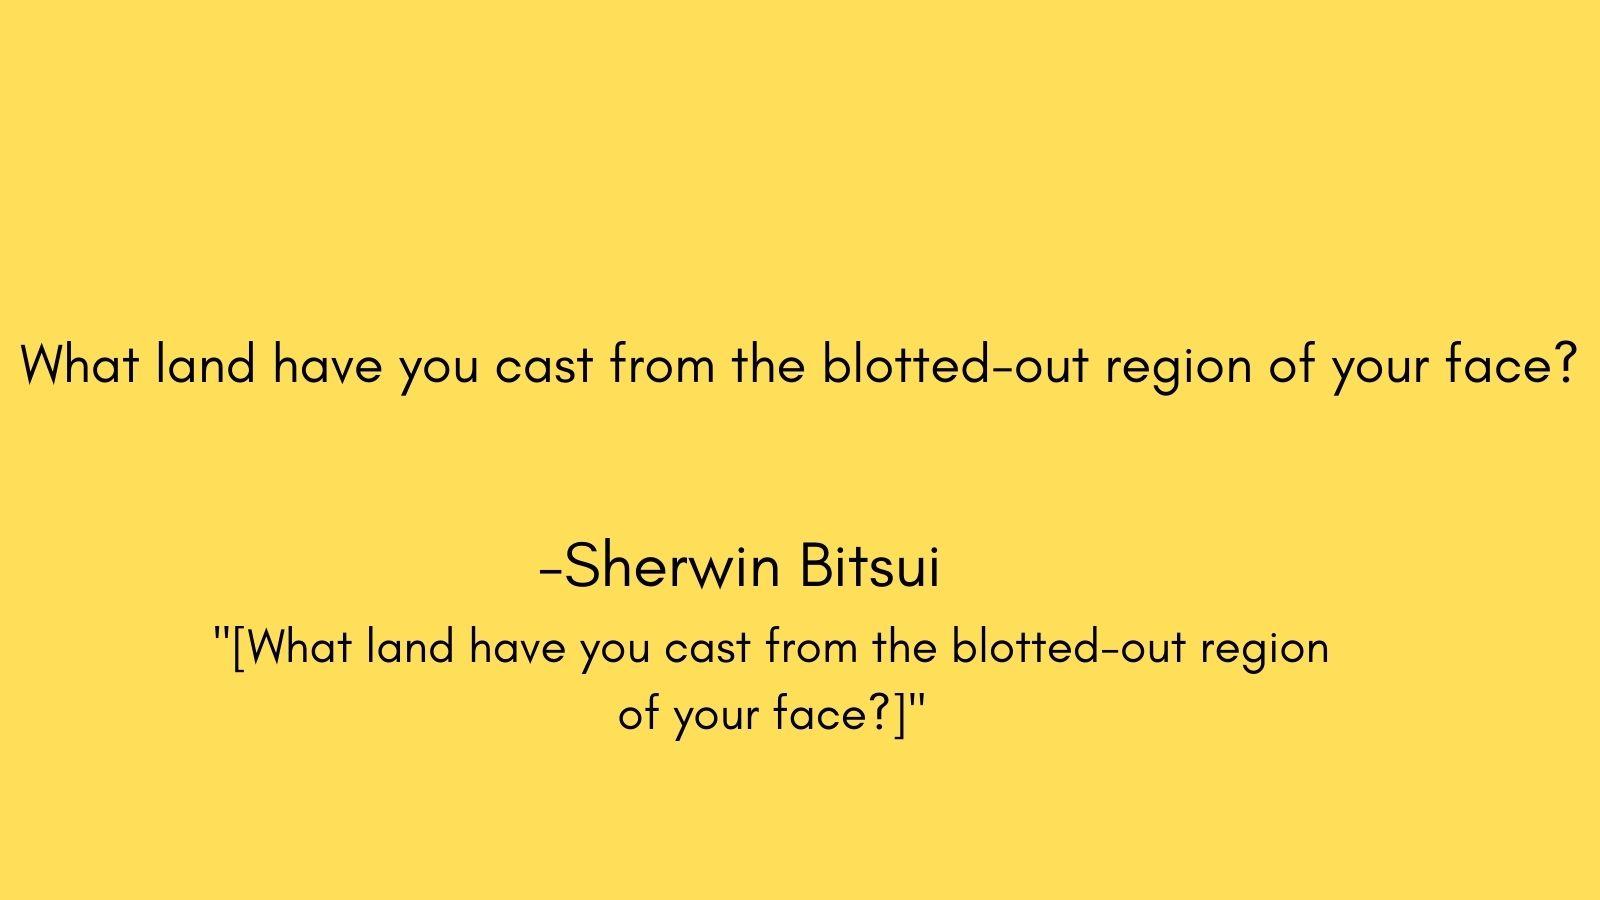  What land have you cast from the blotted-out region of your face?